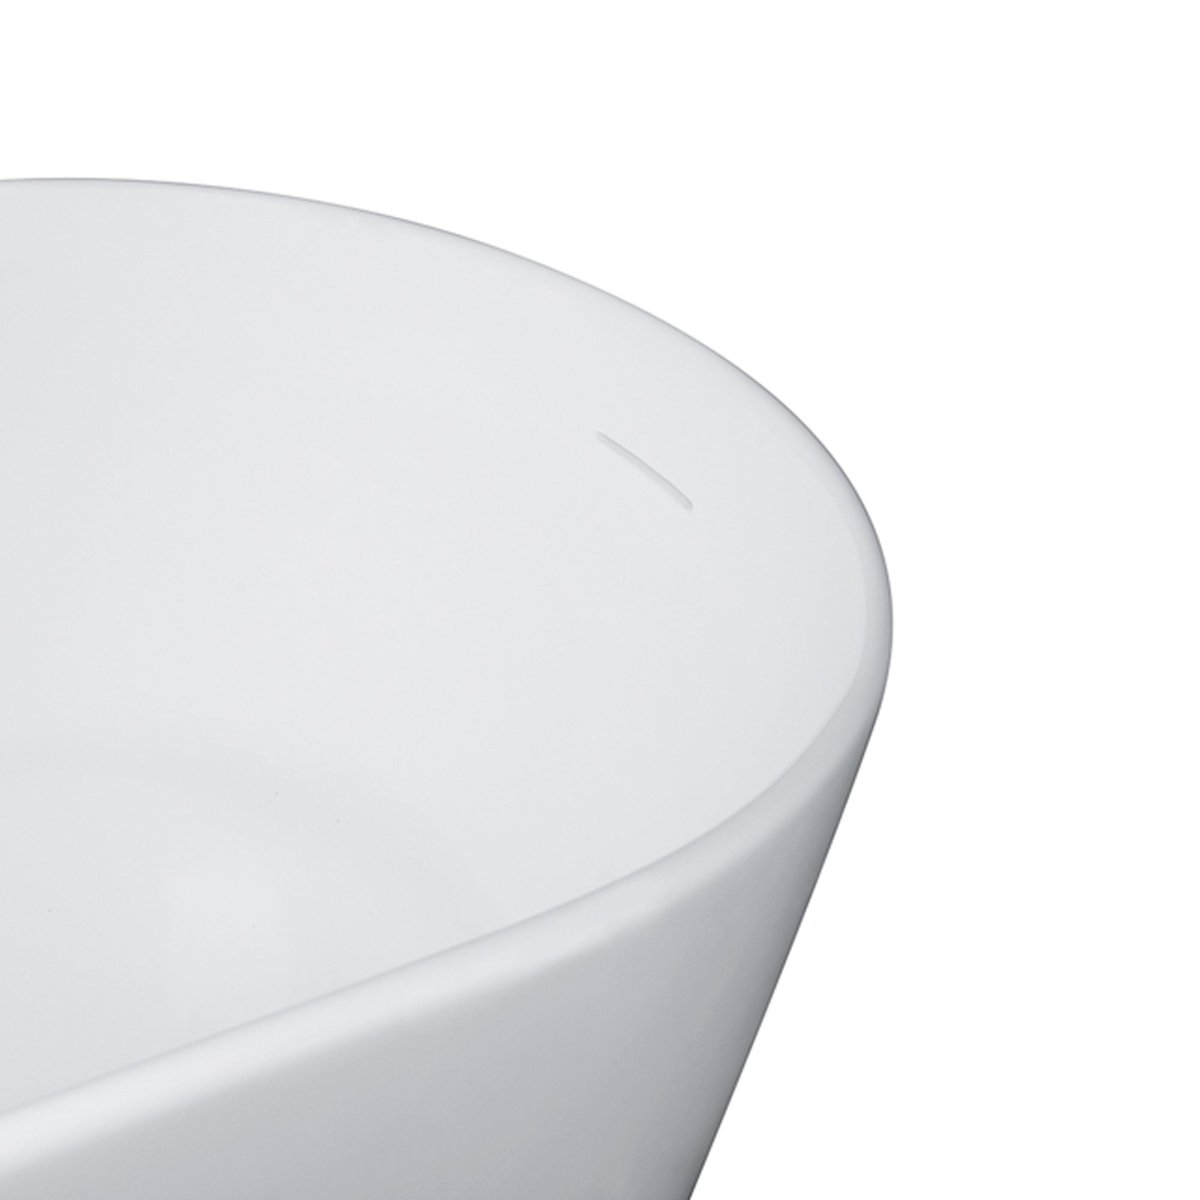 ExBrite 67inch Solid Surface Stone Resin Oval Shape Soaking Bathtub With Overflow For The Bathroom